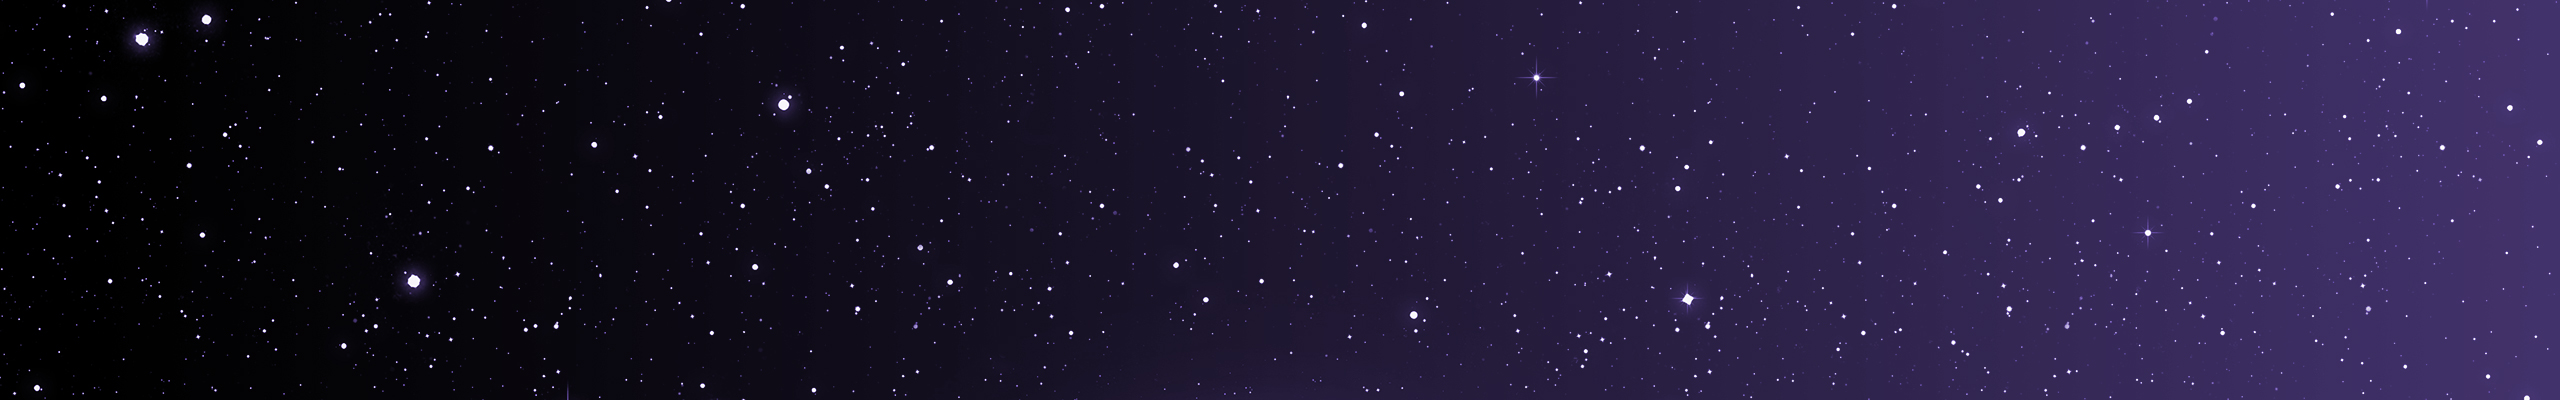 Starry background